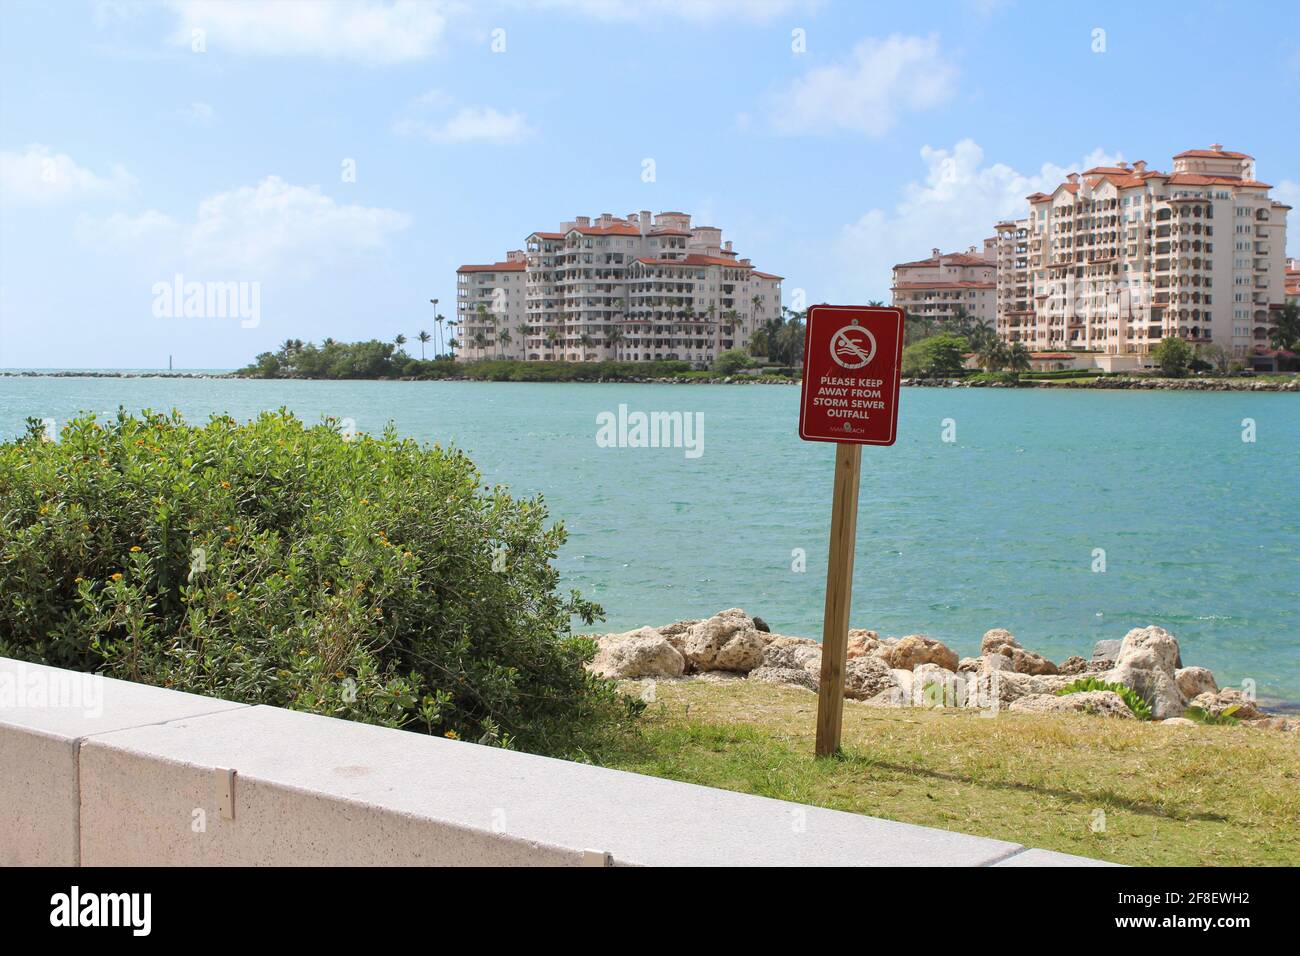 Sign to keep away from storm sewer at South Pointe beach in Miami Beach Florida with a background view of Palazzo Del Sol condominiums in Fisher Island Stock Photo